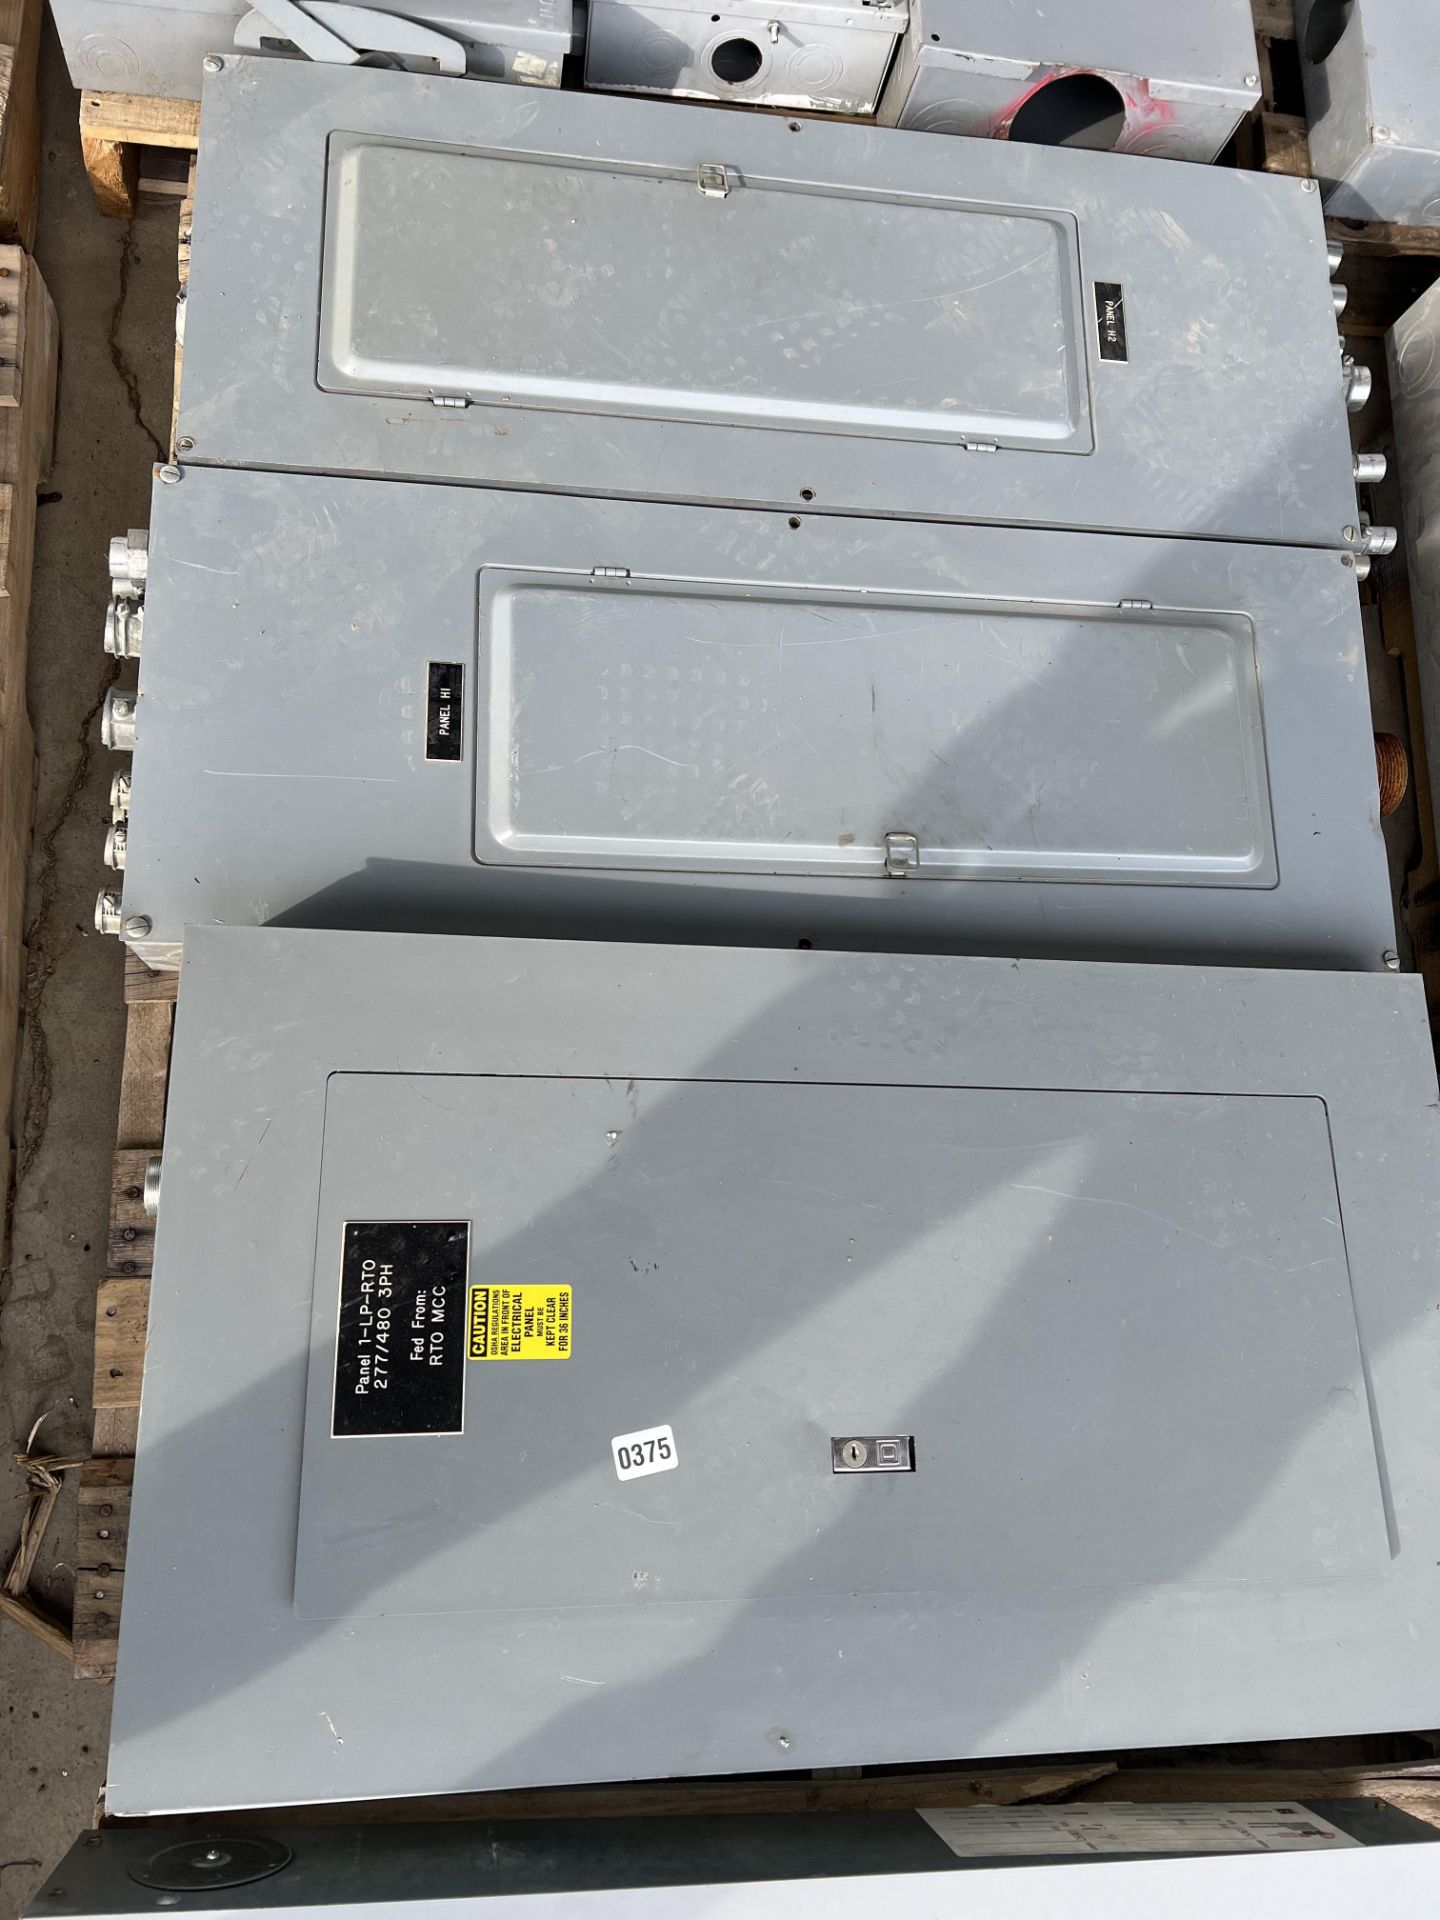 Lot of 3 Electrical Panels